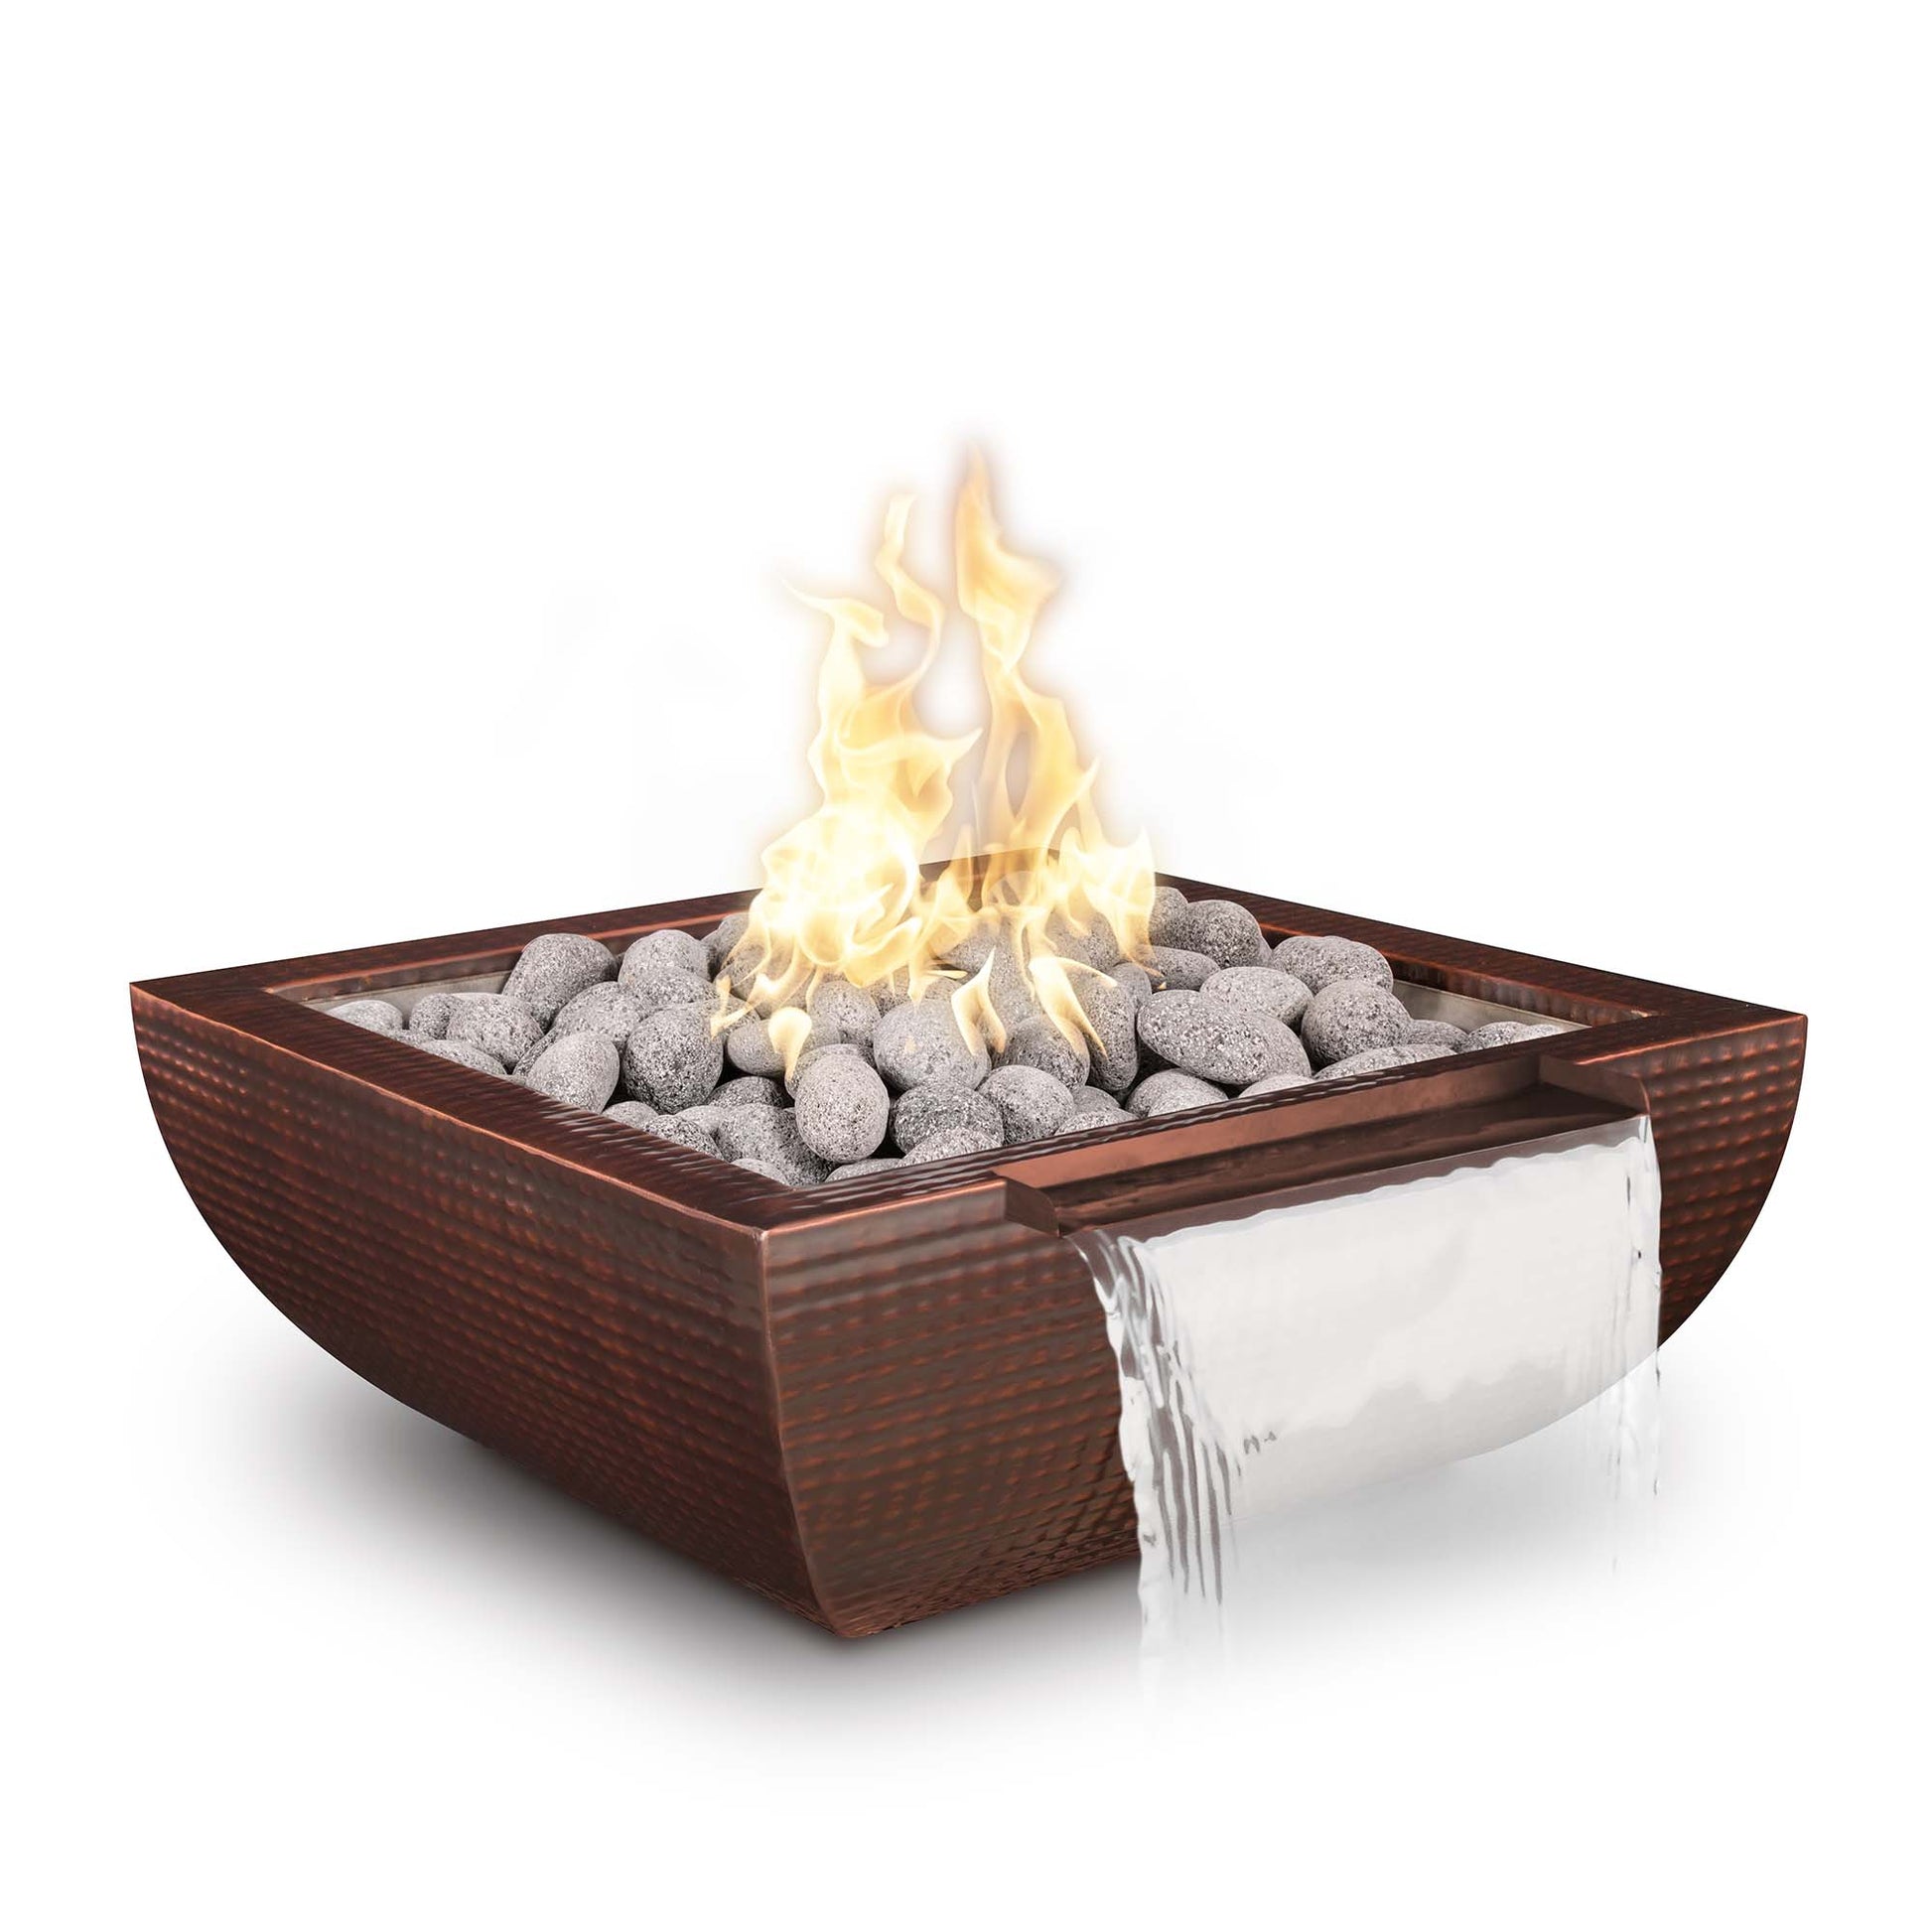 The Outdoor Plus Avalon Wide Spill 30" Java Powder Coated Metal Liquid Propane Fire & Water Bowl with Match Lit Ignition